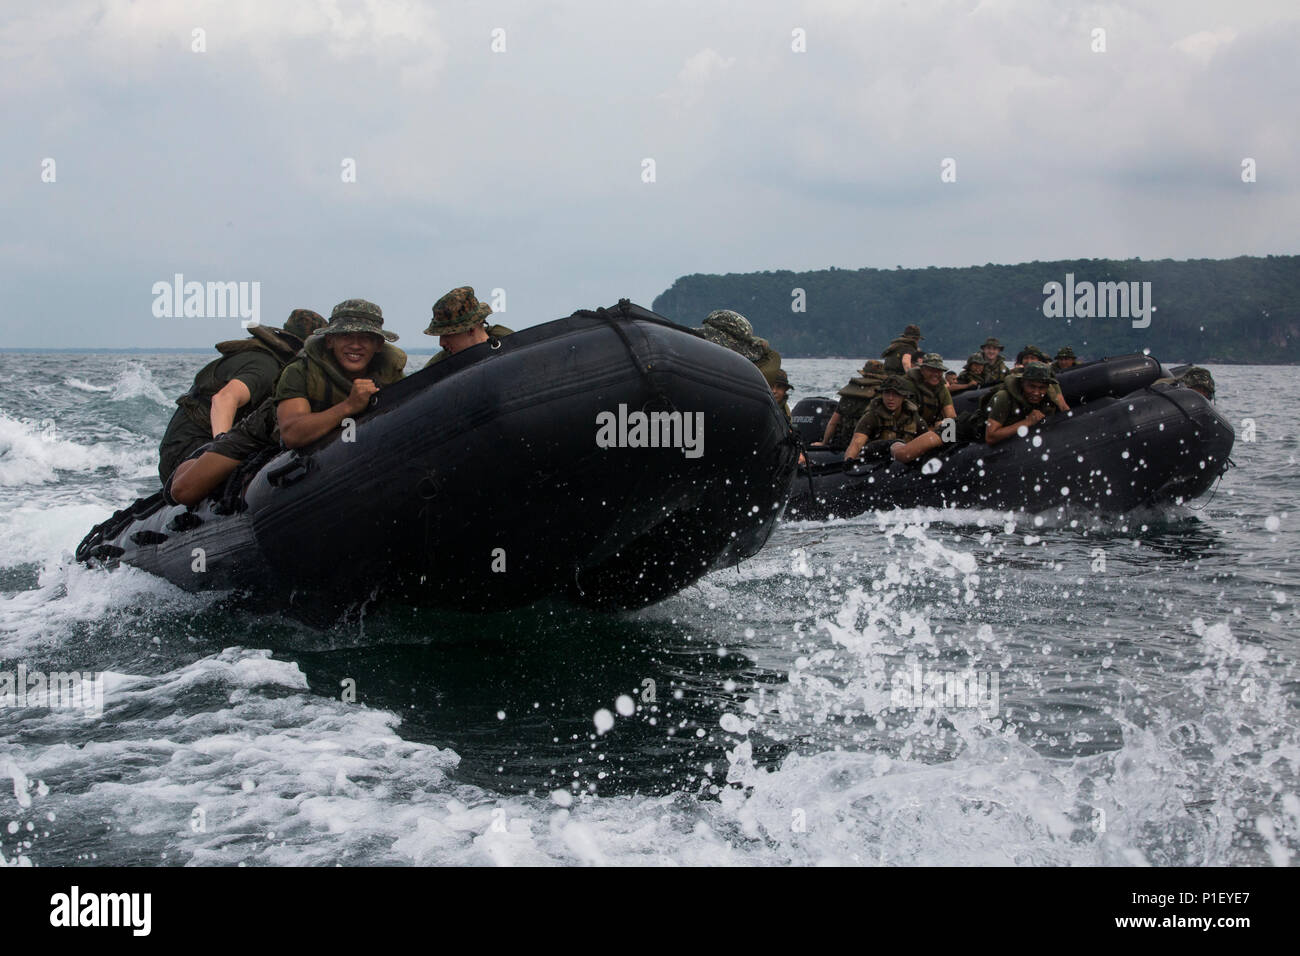 Philippine Marines join U.S. Marines with Fox Company, Battalion Landing Team, 2nd Battalion, 4th Marine Regiment, 31st Marine Expeditionary Unit, during combat rubber raiding craft training as part of Philippine Amphibious Landing Exercise 33 (PHIBLEX) off the coast of Marine Barracks Gregorio Lim, Ternate, Philippines, Oct. 5, 2016. PHIBLEX is a bilateral training exercise designed to improve the interoperability, readiness and professional relationships between the U.S. Marine Corps and partner nations. (U.S. Marine Corps photo by Cpl. Darien J. Bjorndal) Stock Photo